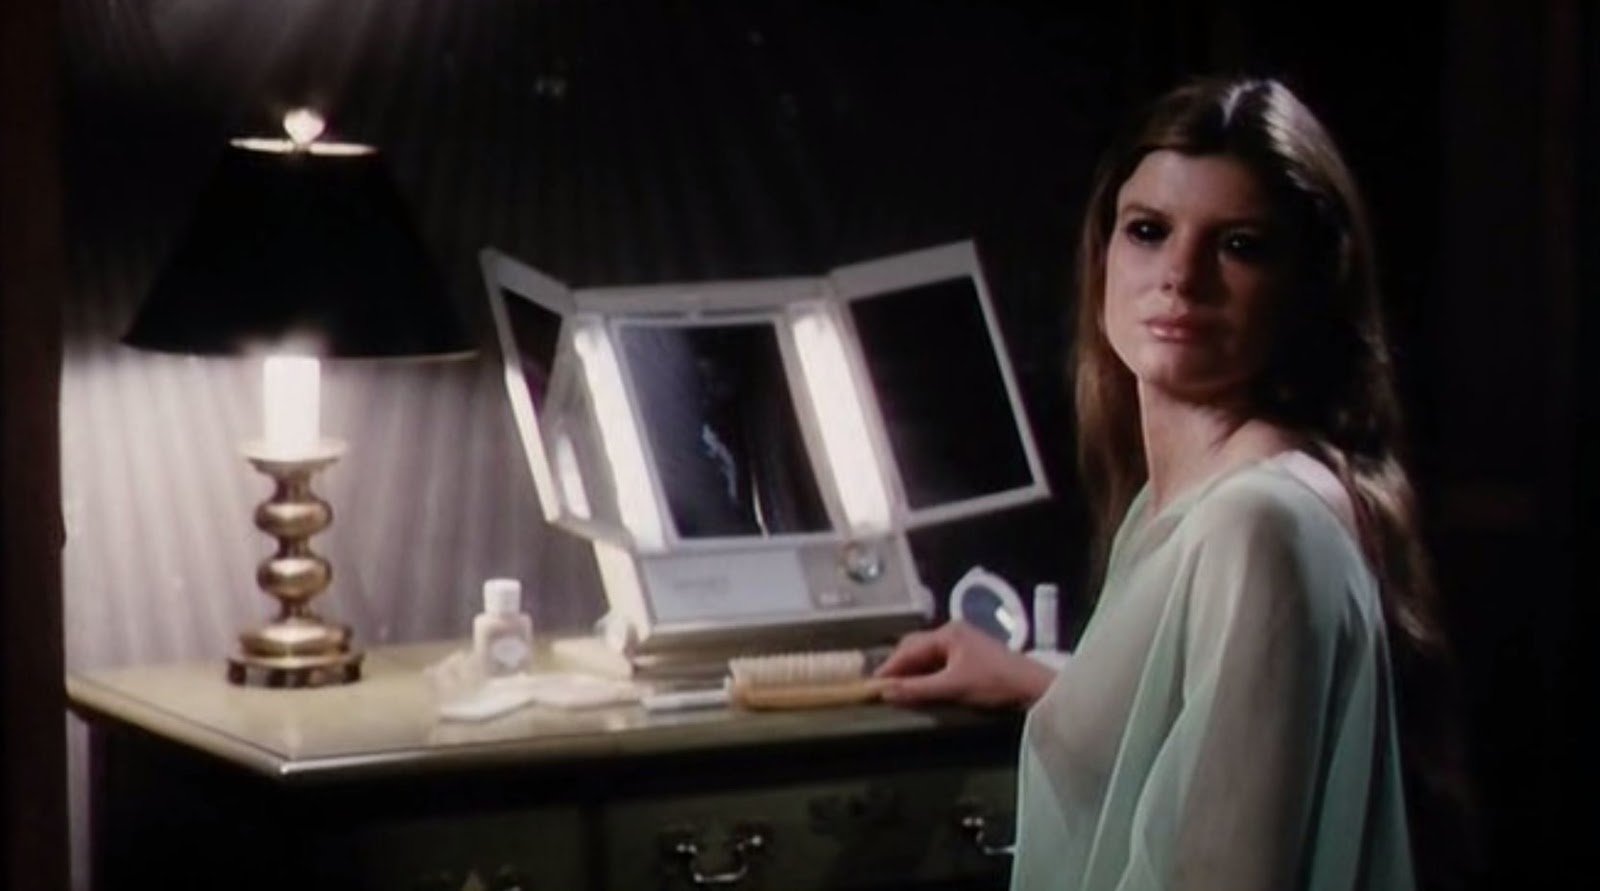 dennis evenson recommends katharine ross nude pics pic